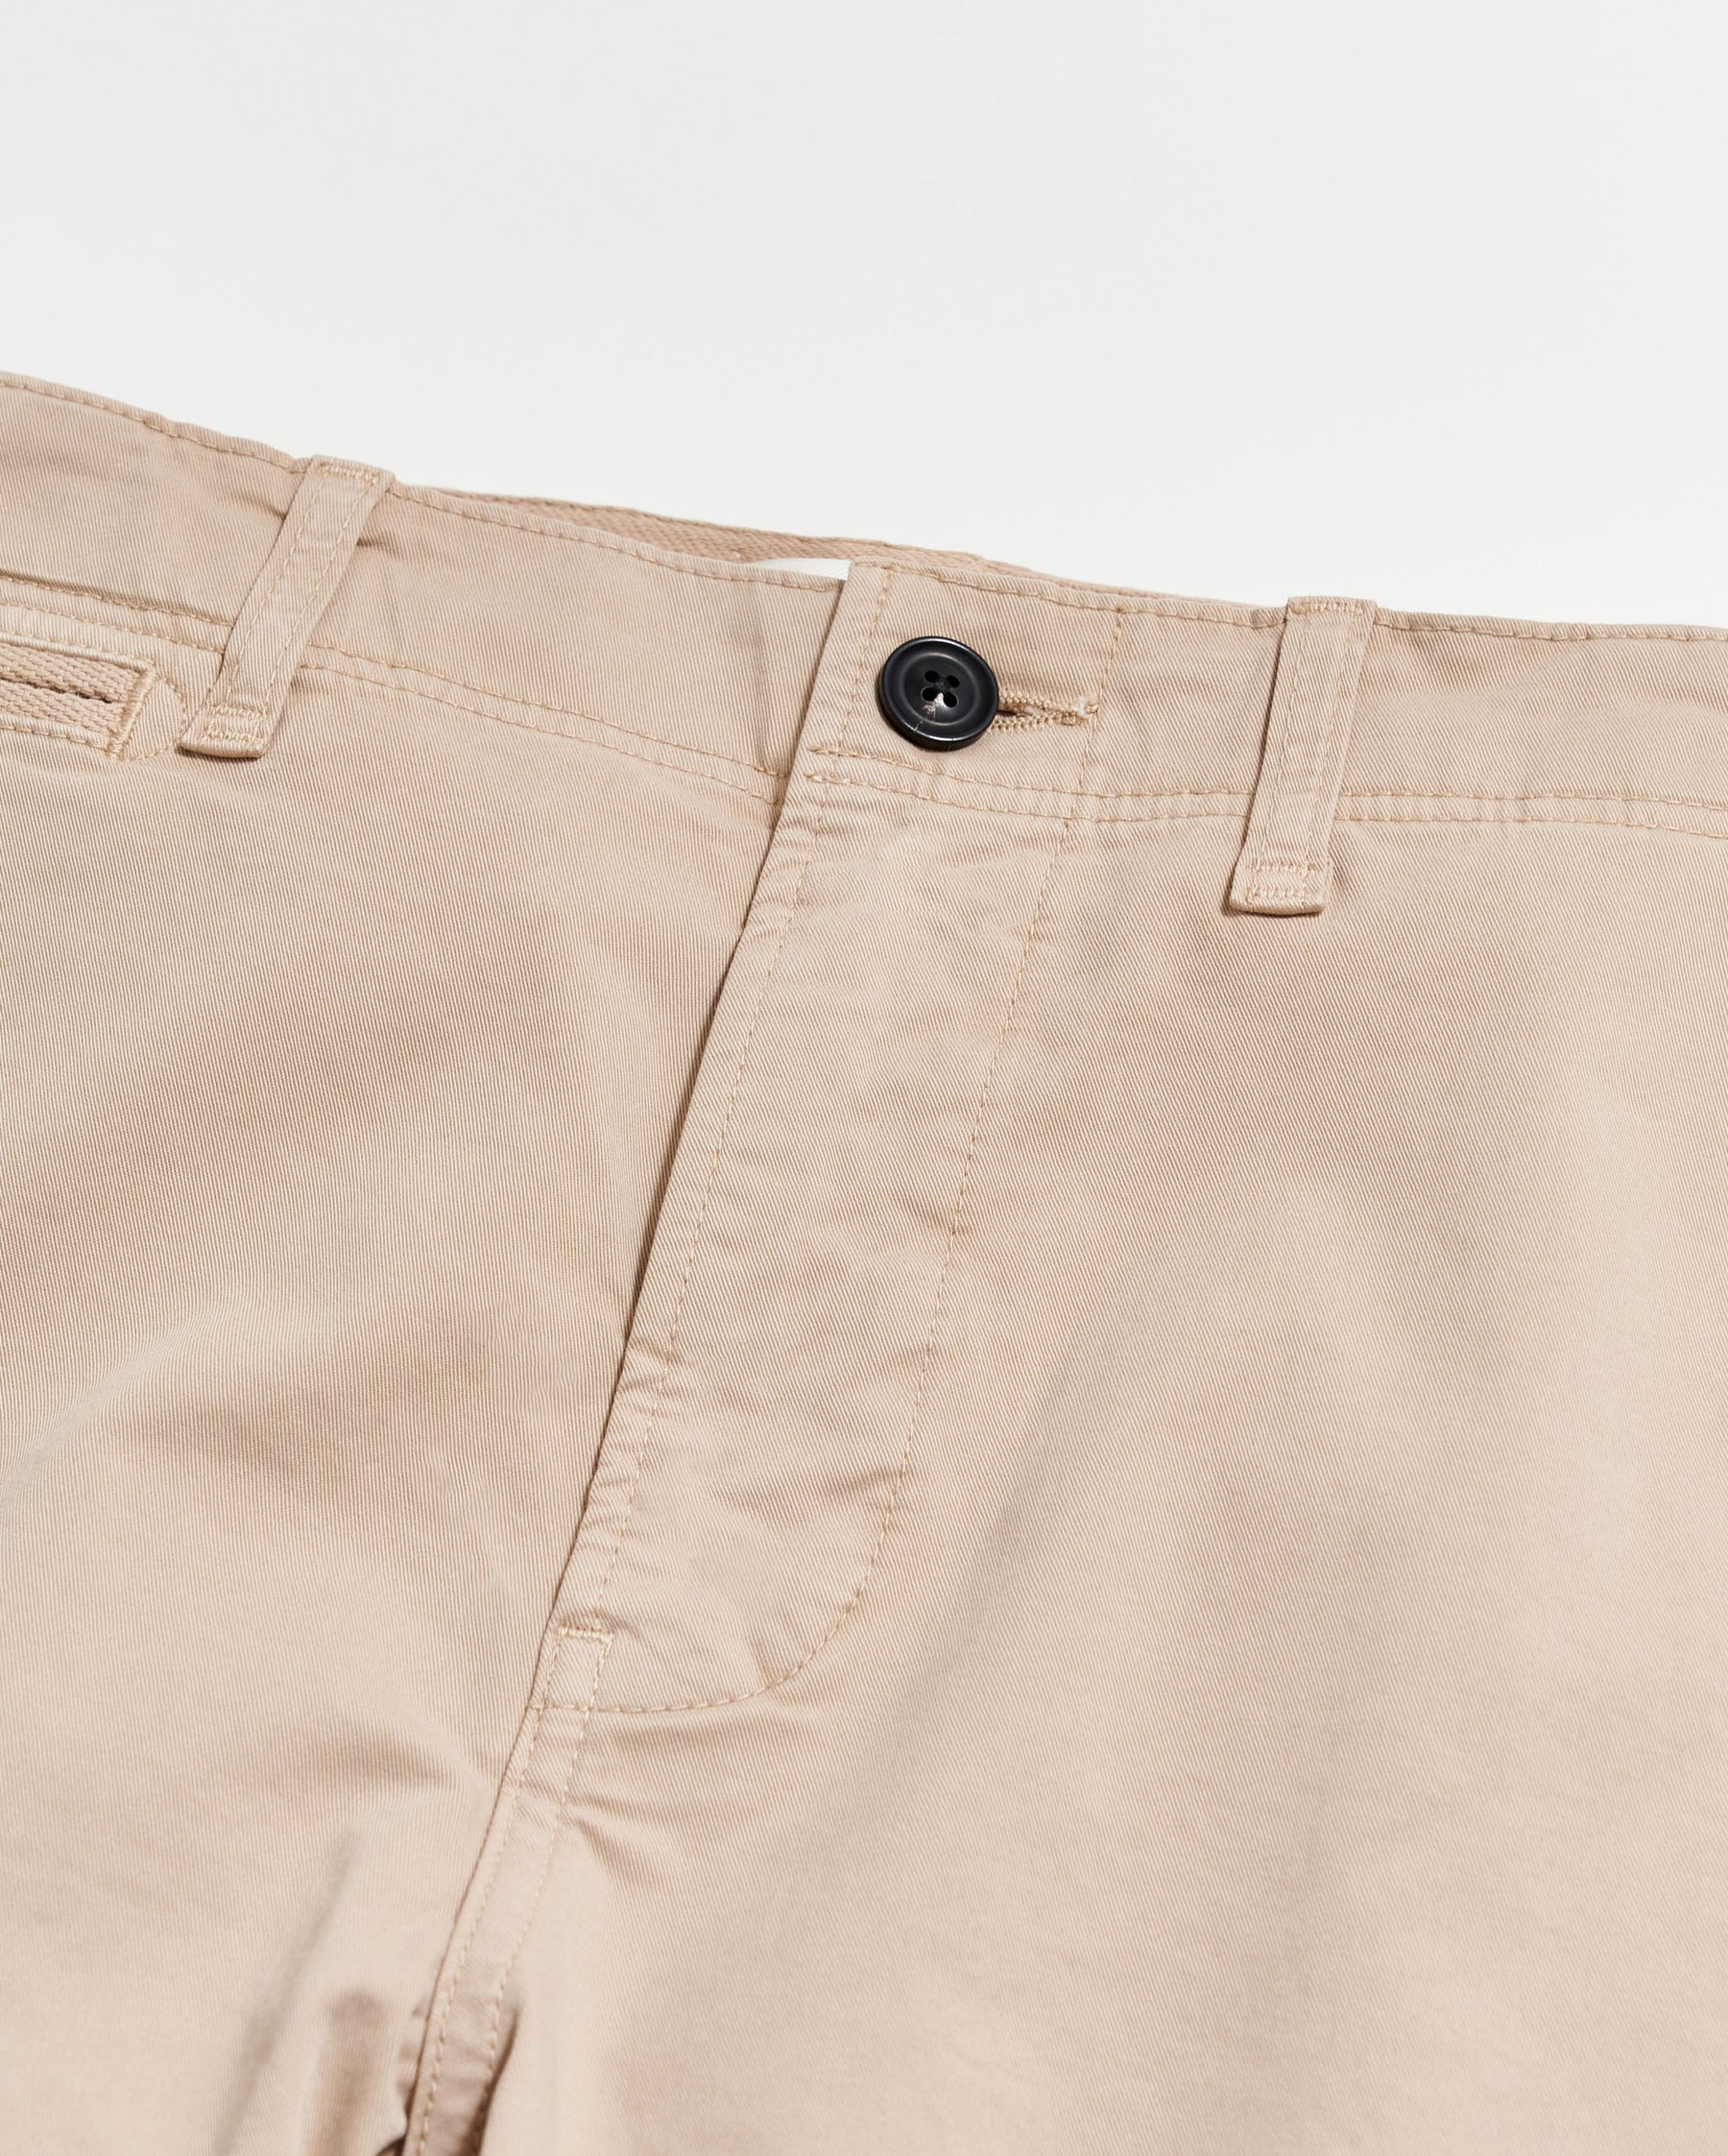 Best Chinos For Men | Brands and Outfits | Mens chinos, Best chinos, Chinos  style